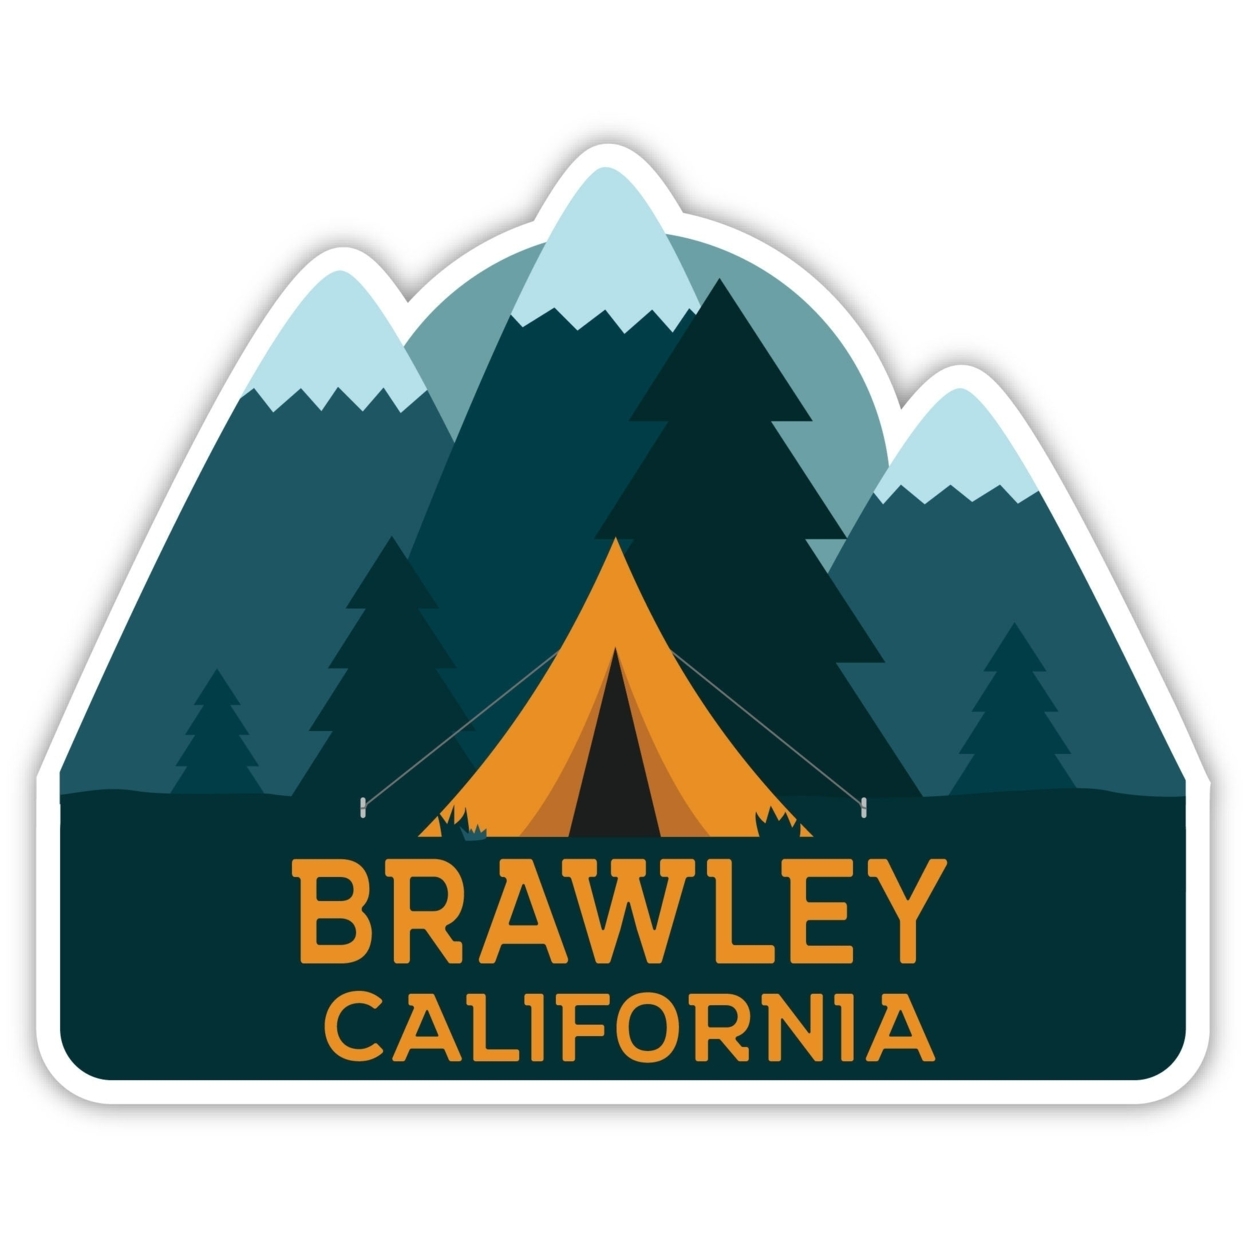 Brawley California Souvenir Decorative Stickers (Choose Theme And Size) - 4-Pack, 4-Inch, Tent